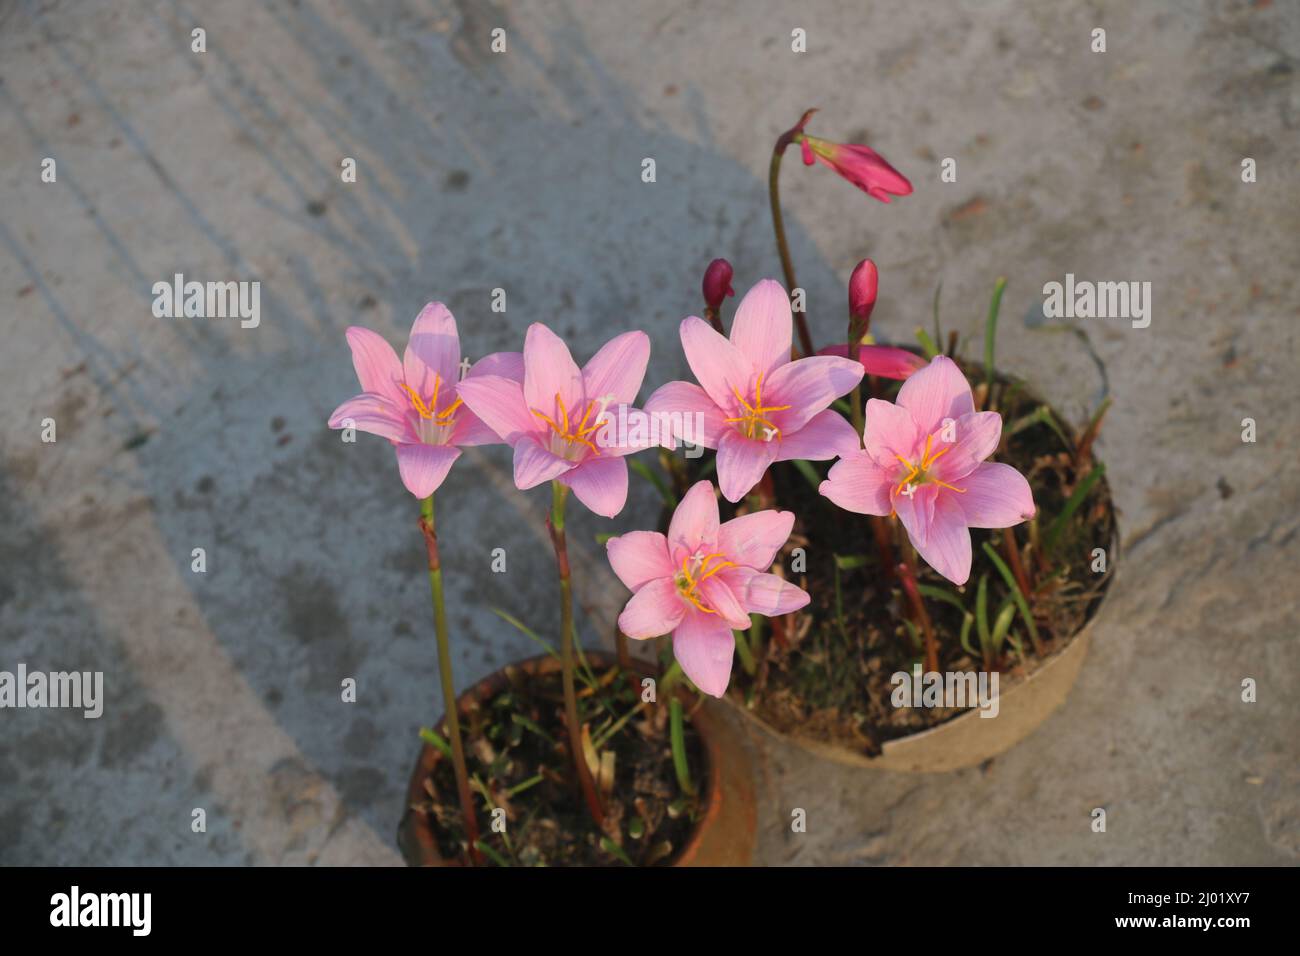 Zephyranthes grandiflora ,This is one kind of giant rain lily . Commonly known as pink rain lily ,rain flower ,Zephyr lily, z.grandiflora ,Z,rosea etc. Stock Photo